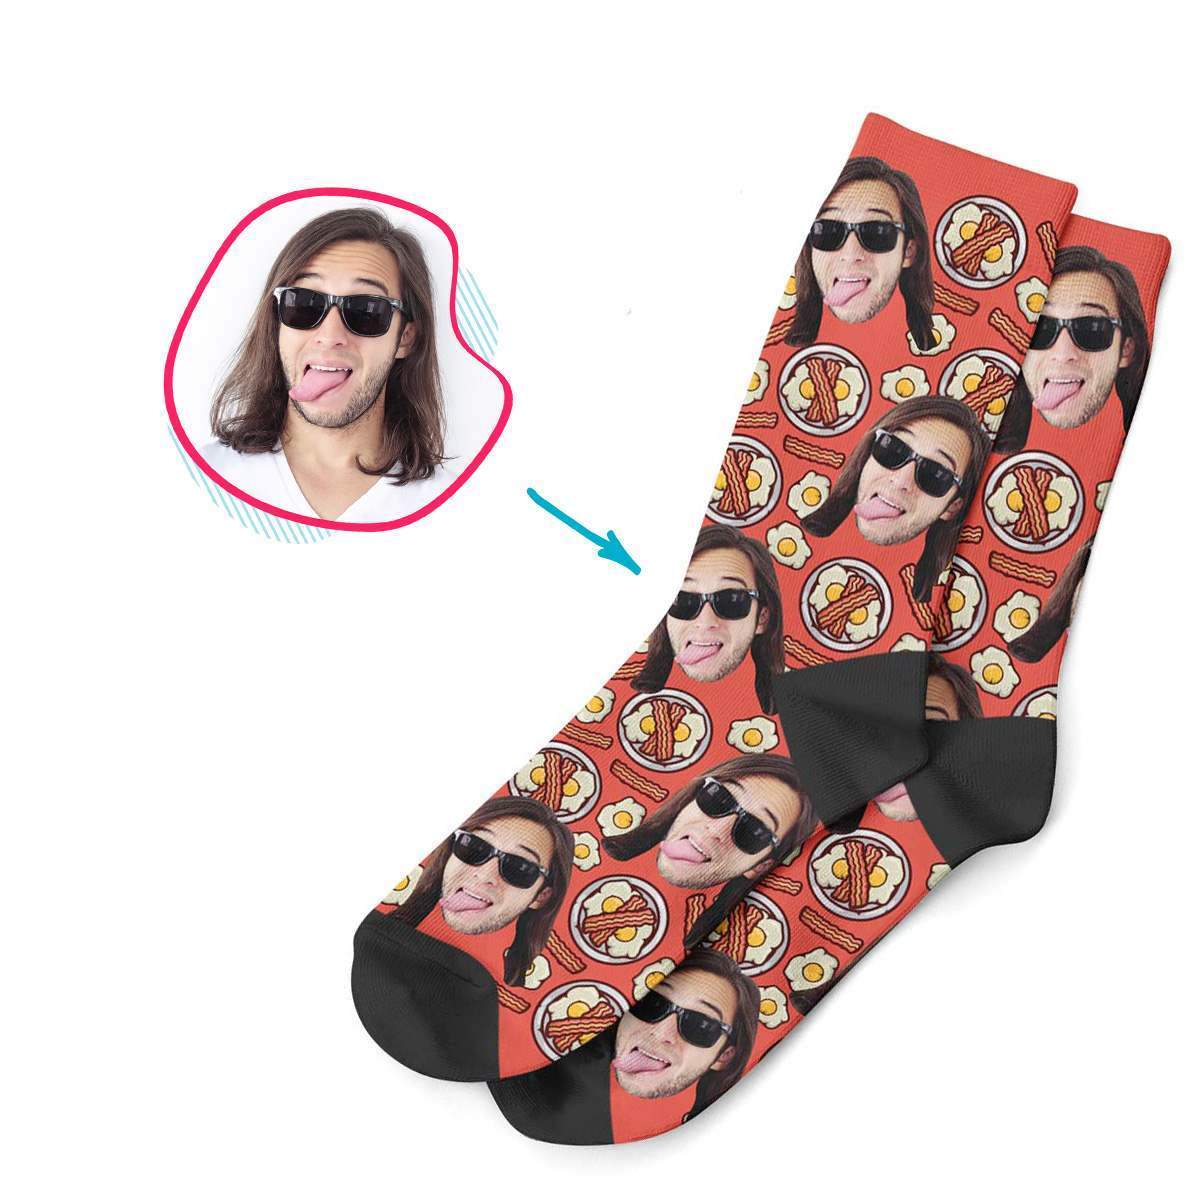 red Bacon and Eggs socks personalized with photo of face printed on them